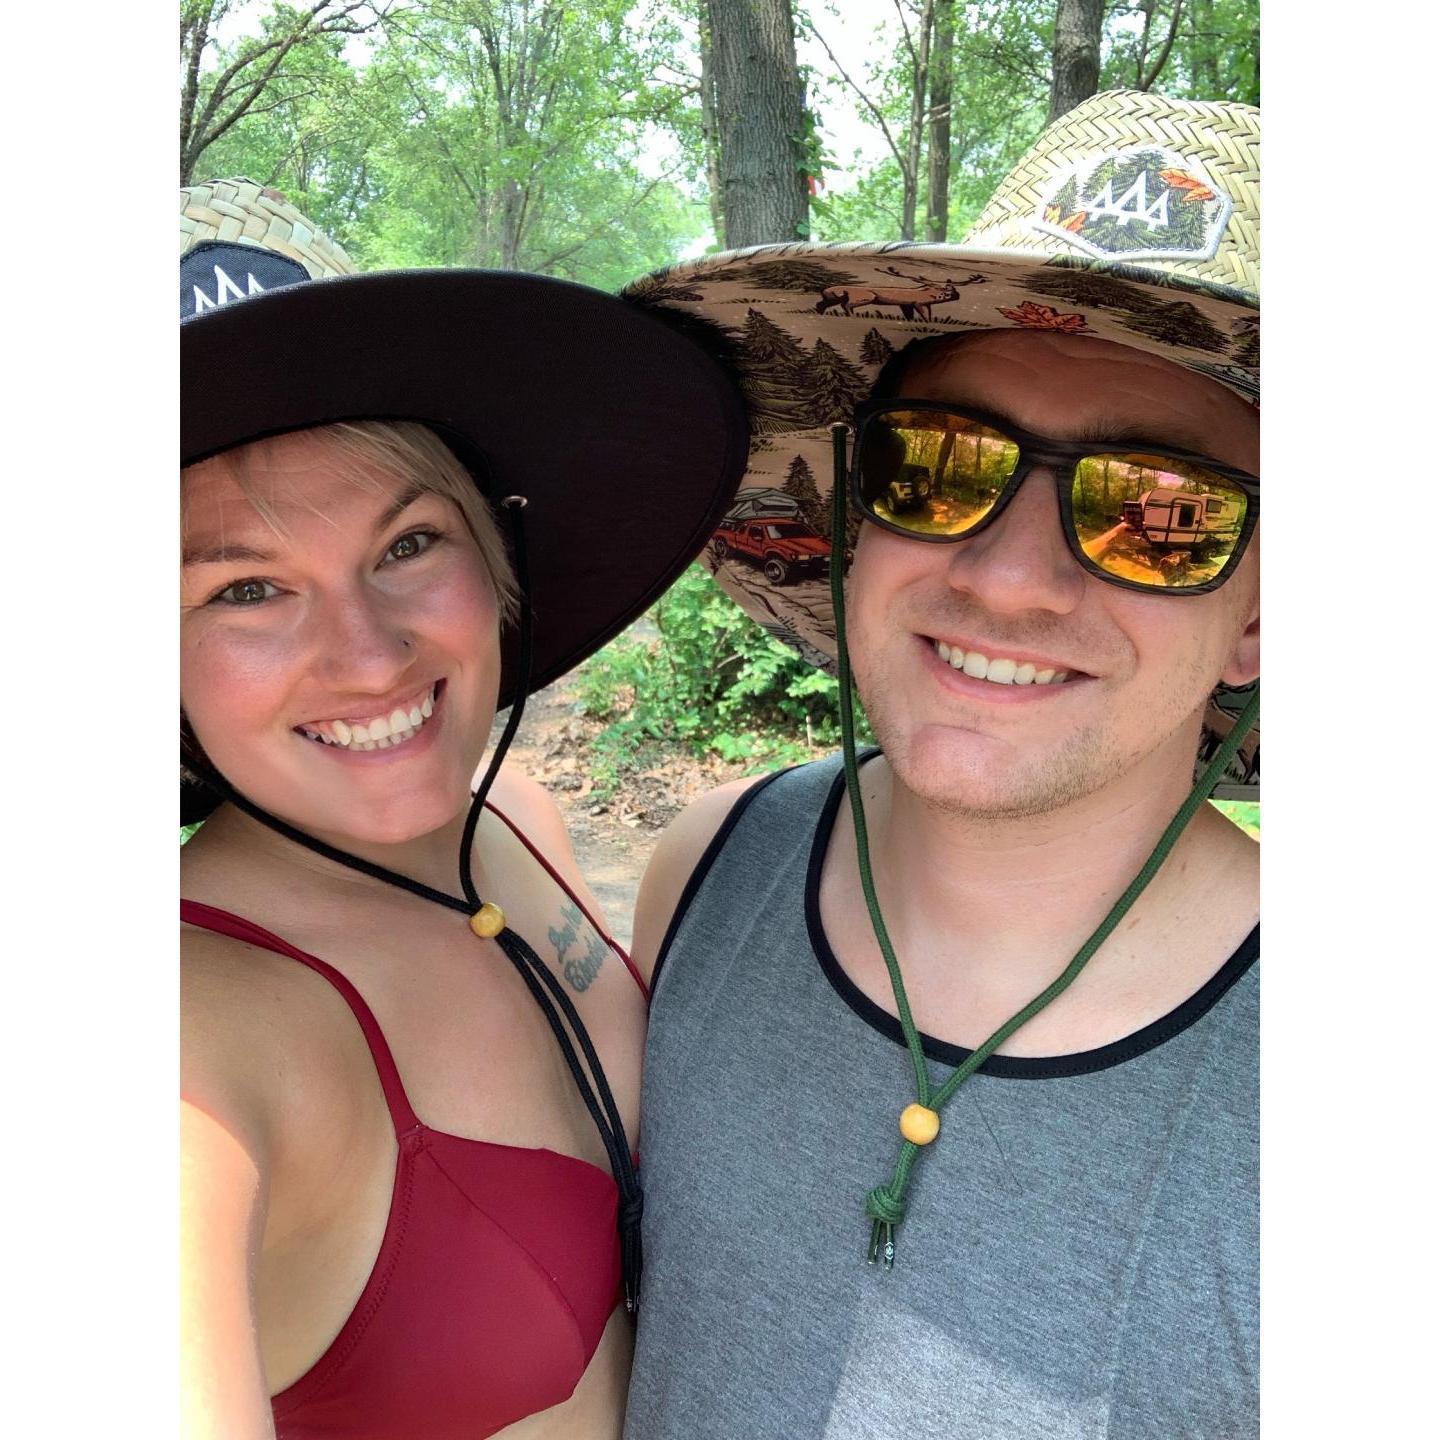 We love camping and our Panama Jack hats